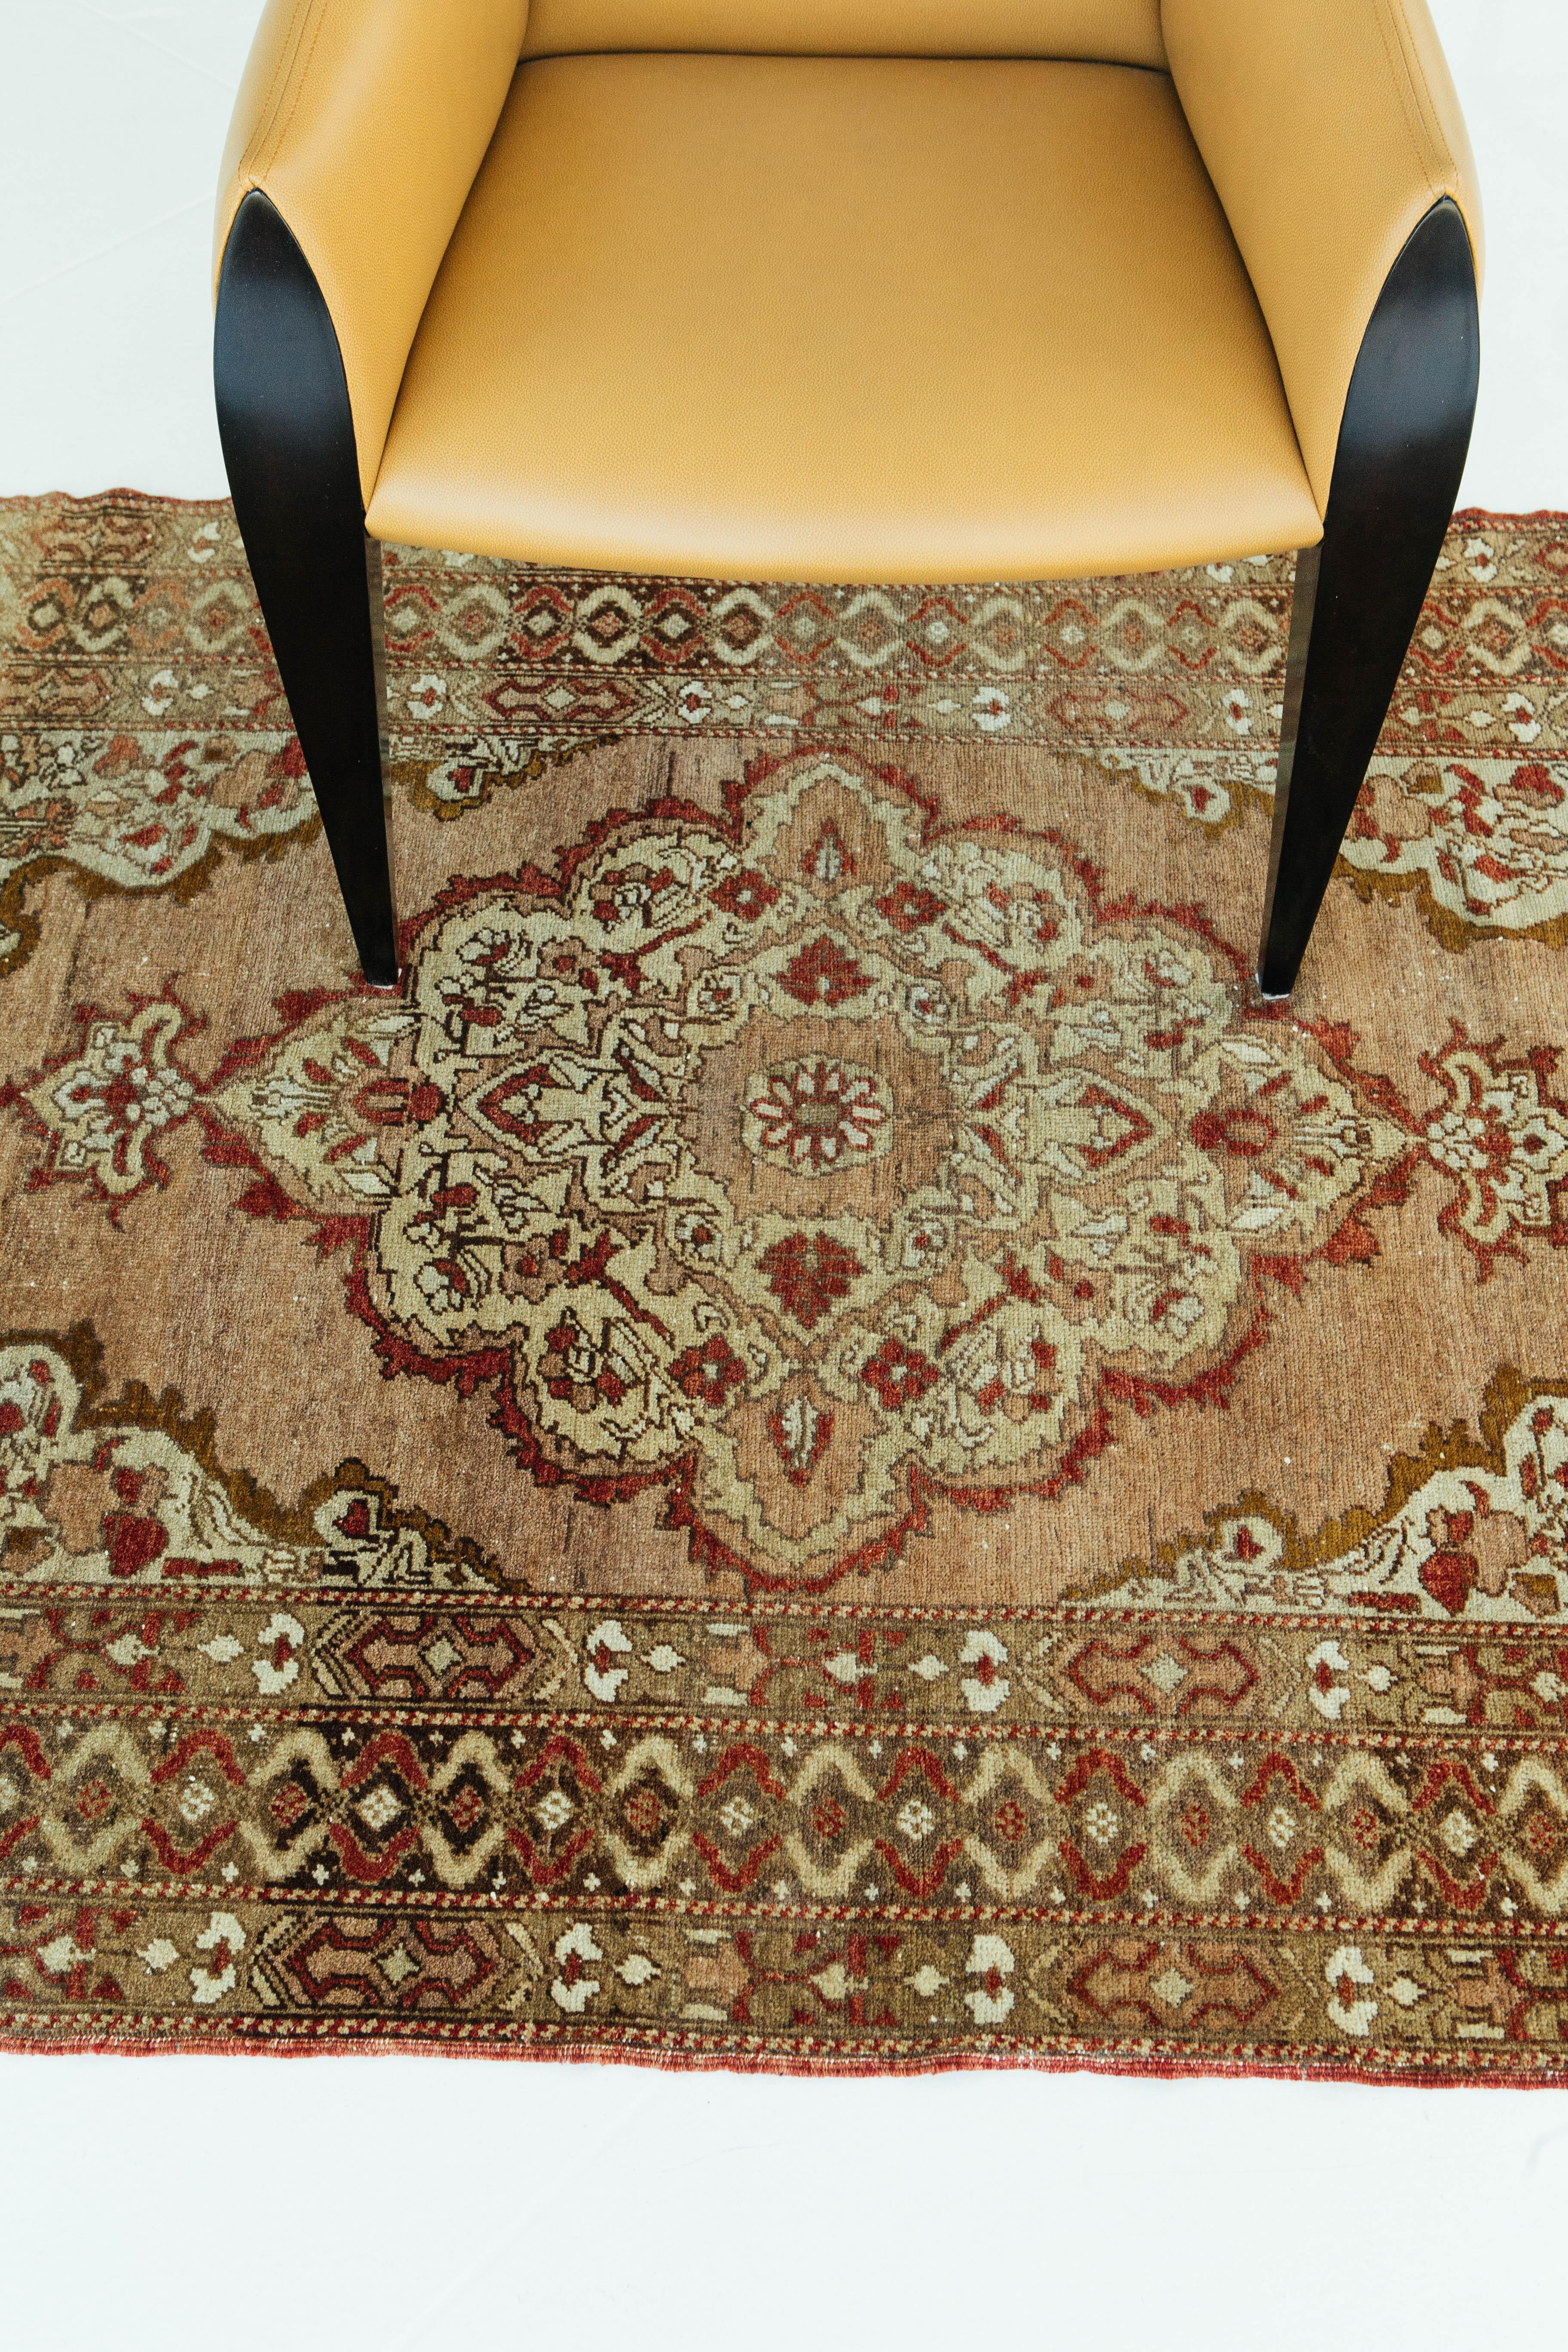 A charming Turkish Anatolian rug in beautiful peach, brown and ivory colors. This vintage piece has traditional Anatolian designs that weave together dyes and colours, motifs, textures and techniques that are popular in Anatolia or Asia Minor. This